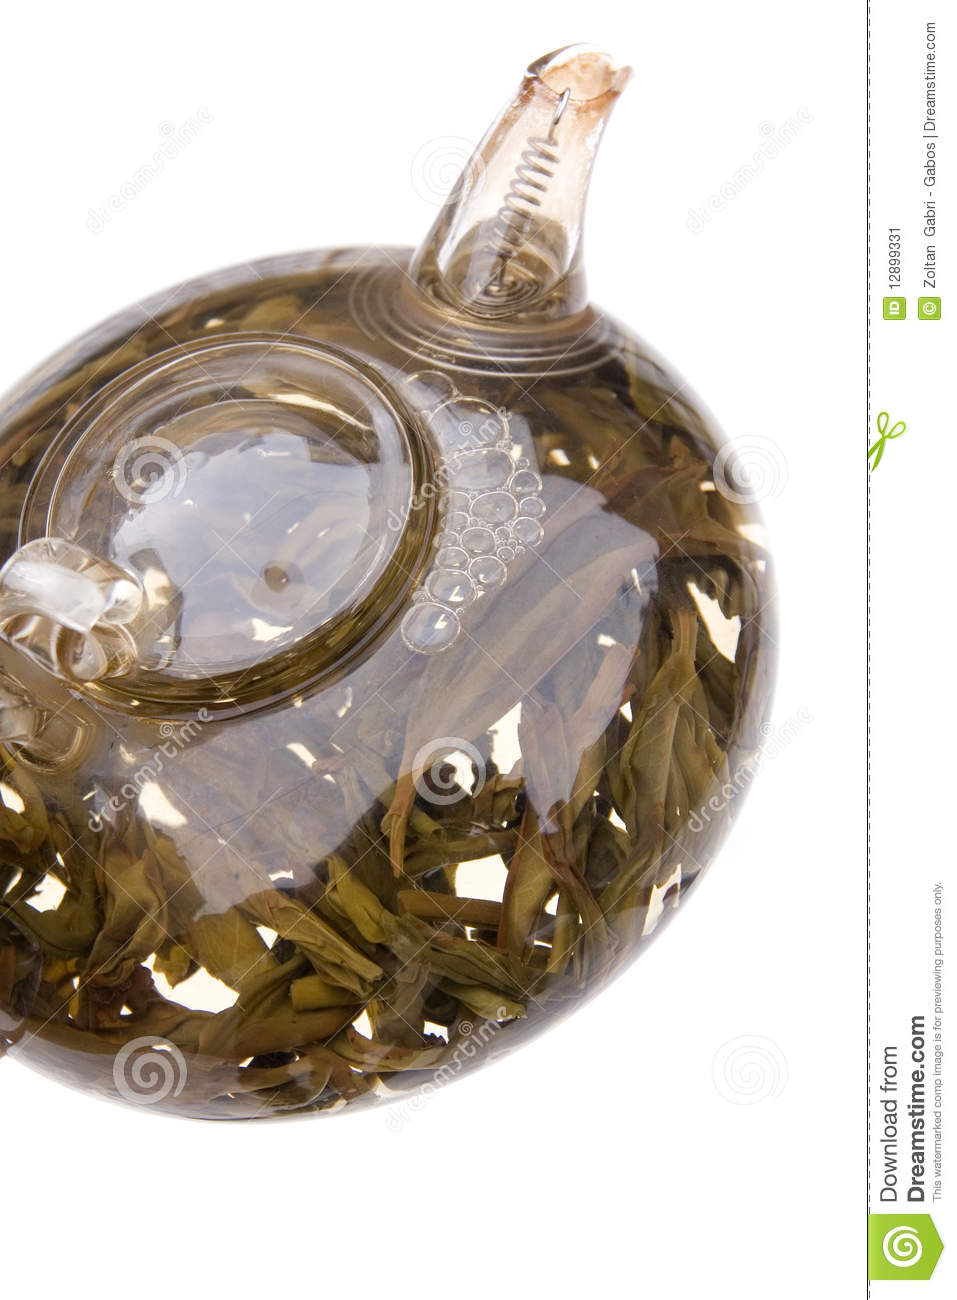 Chinese Green Tea In Glass Teapot In Natural Light